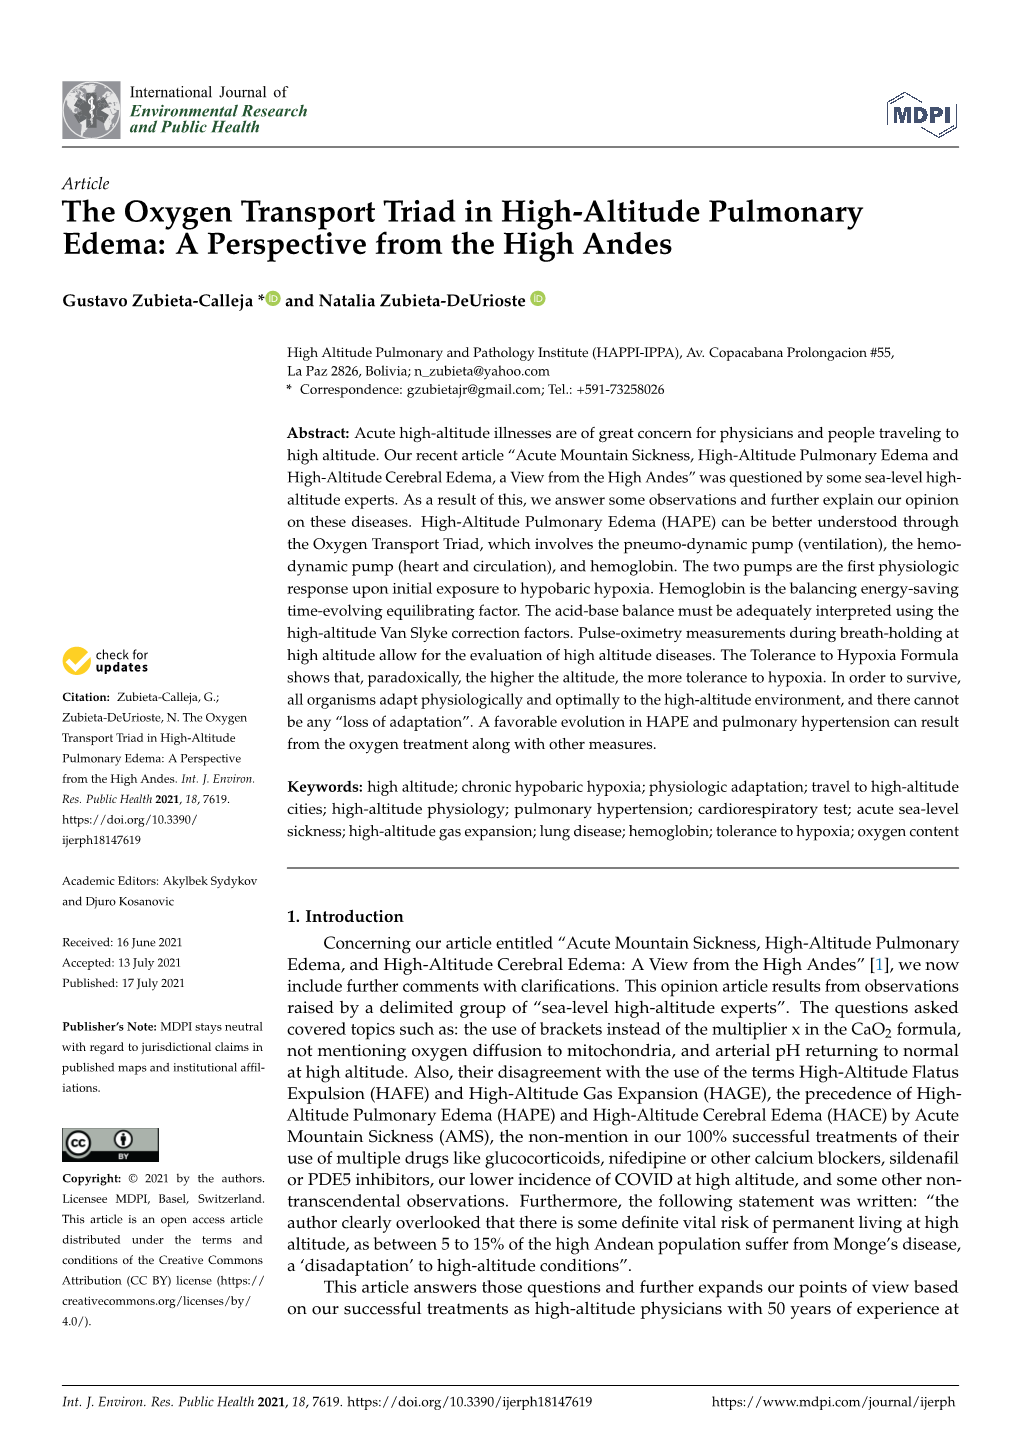 The Oxygen Transport Triad in High-Altitude Pulmonary Edema: a Perspective from the High Andes